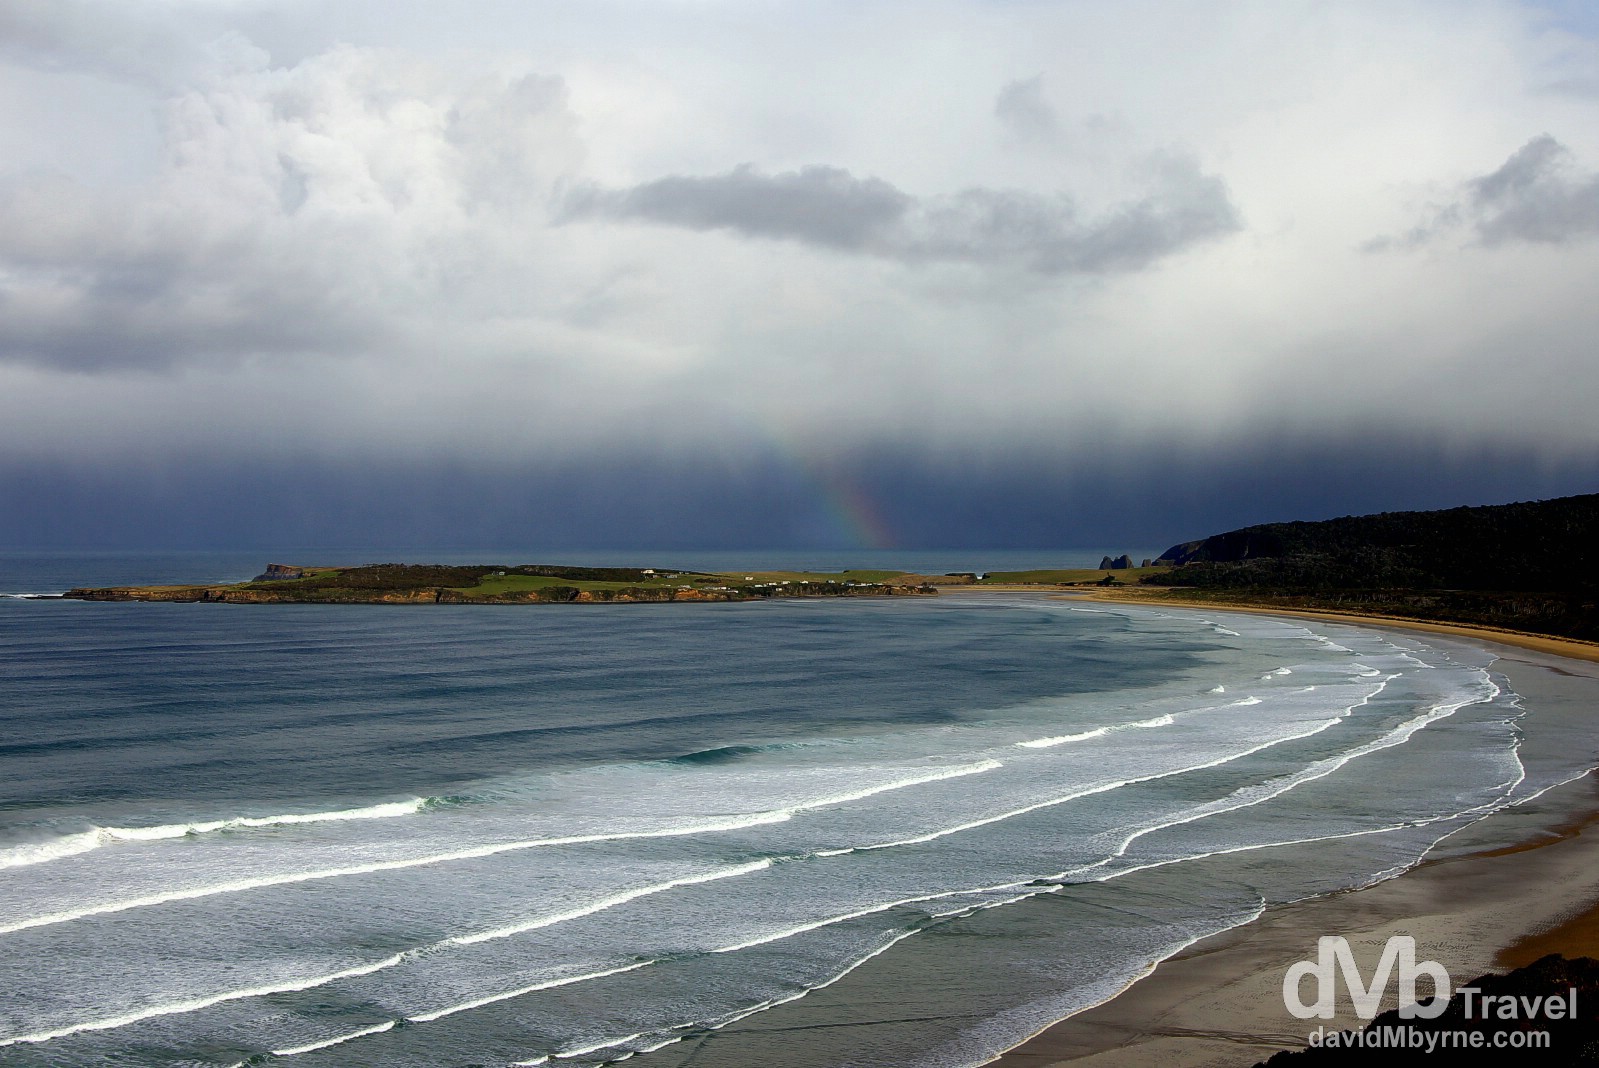 A faint rainbow & an approaching low front off shore of the Catlins Coast, South Island, New Zealand. May 28th 2012.